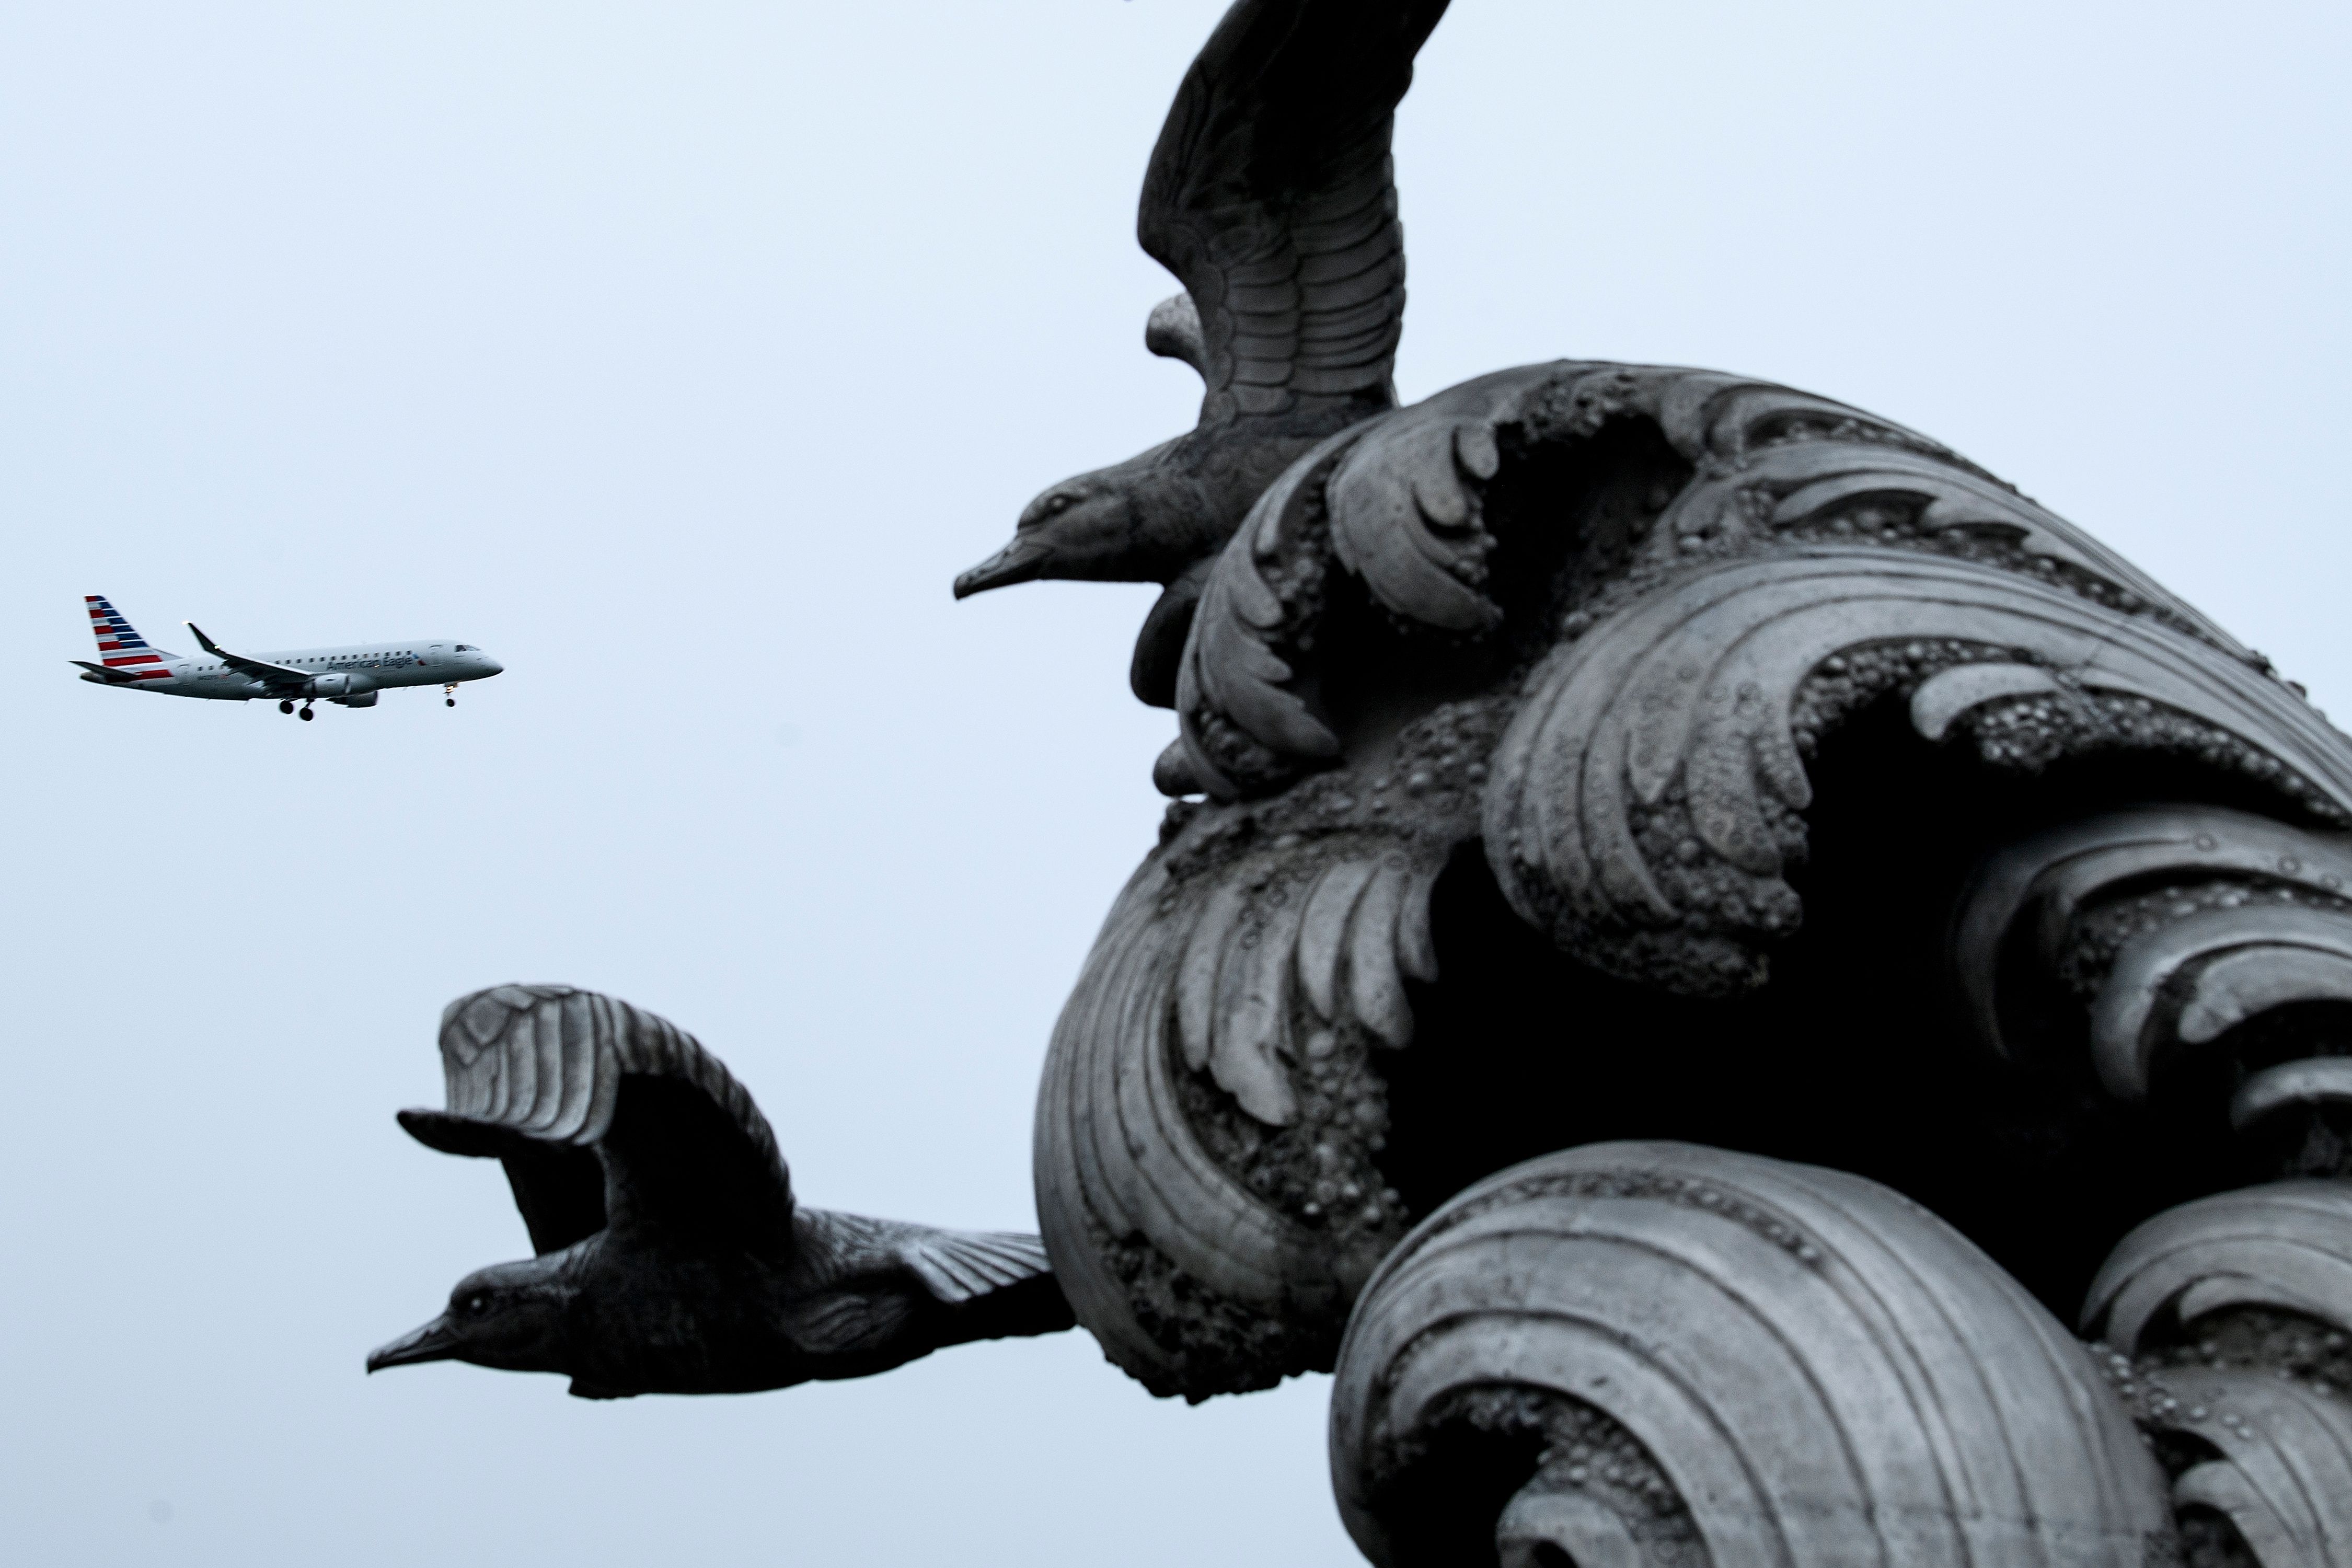 An American Airlines plane passes the Navy - Merchant Marine Memorial 